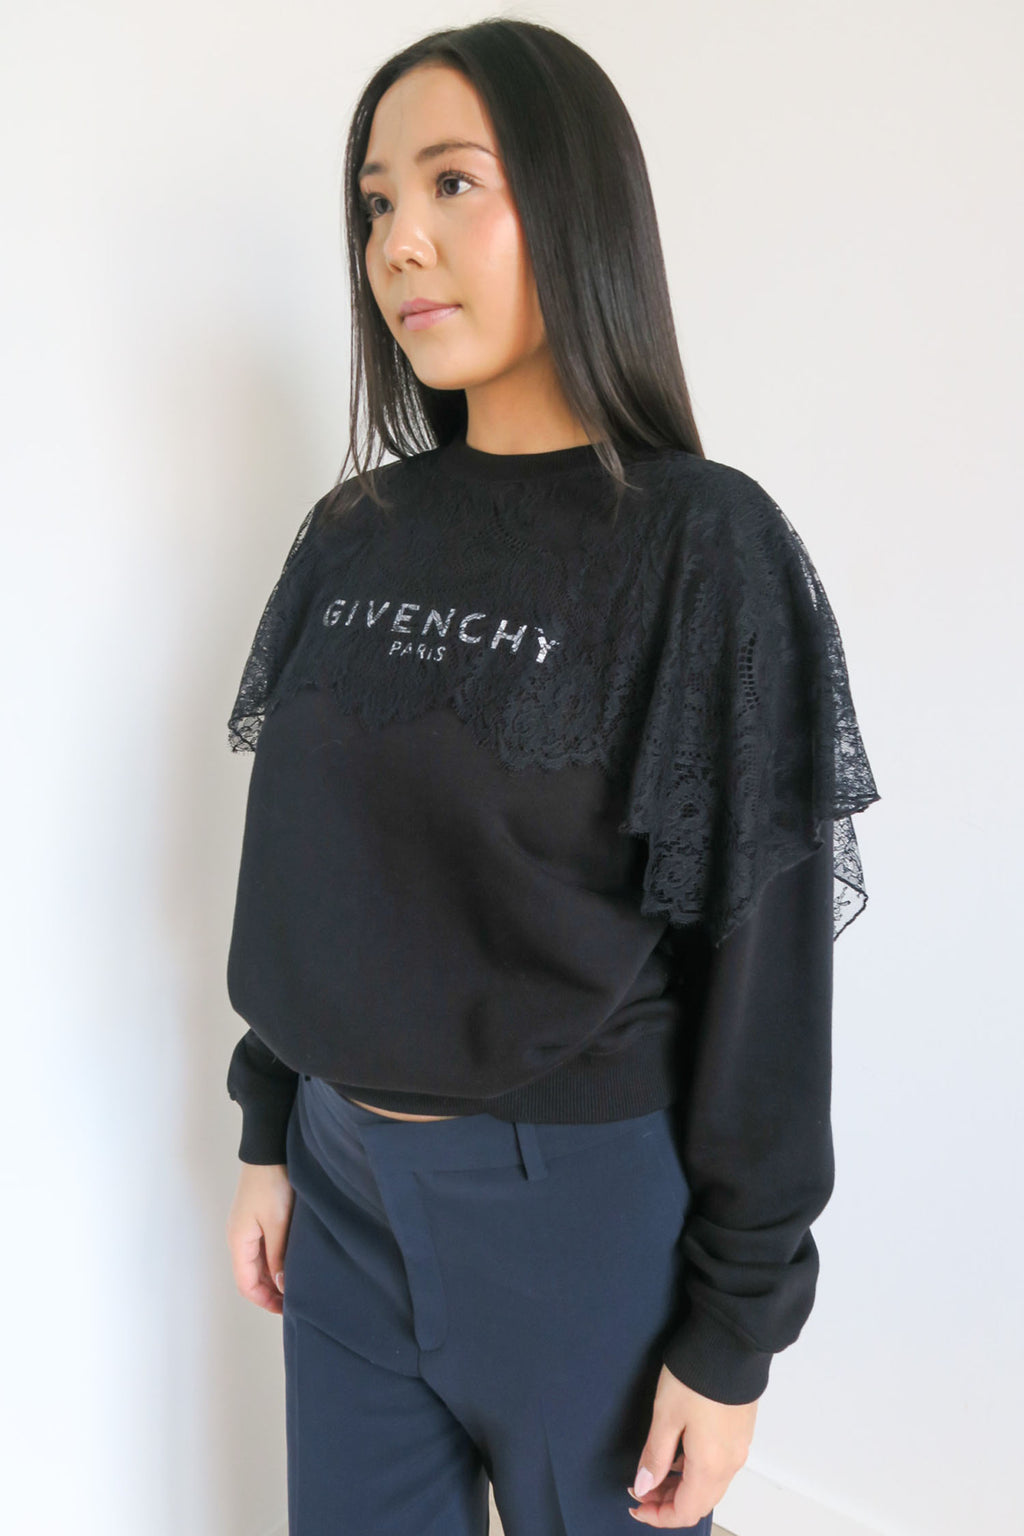 Givenchy Graphic Print Crew Sweater sz S